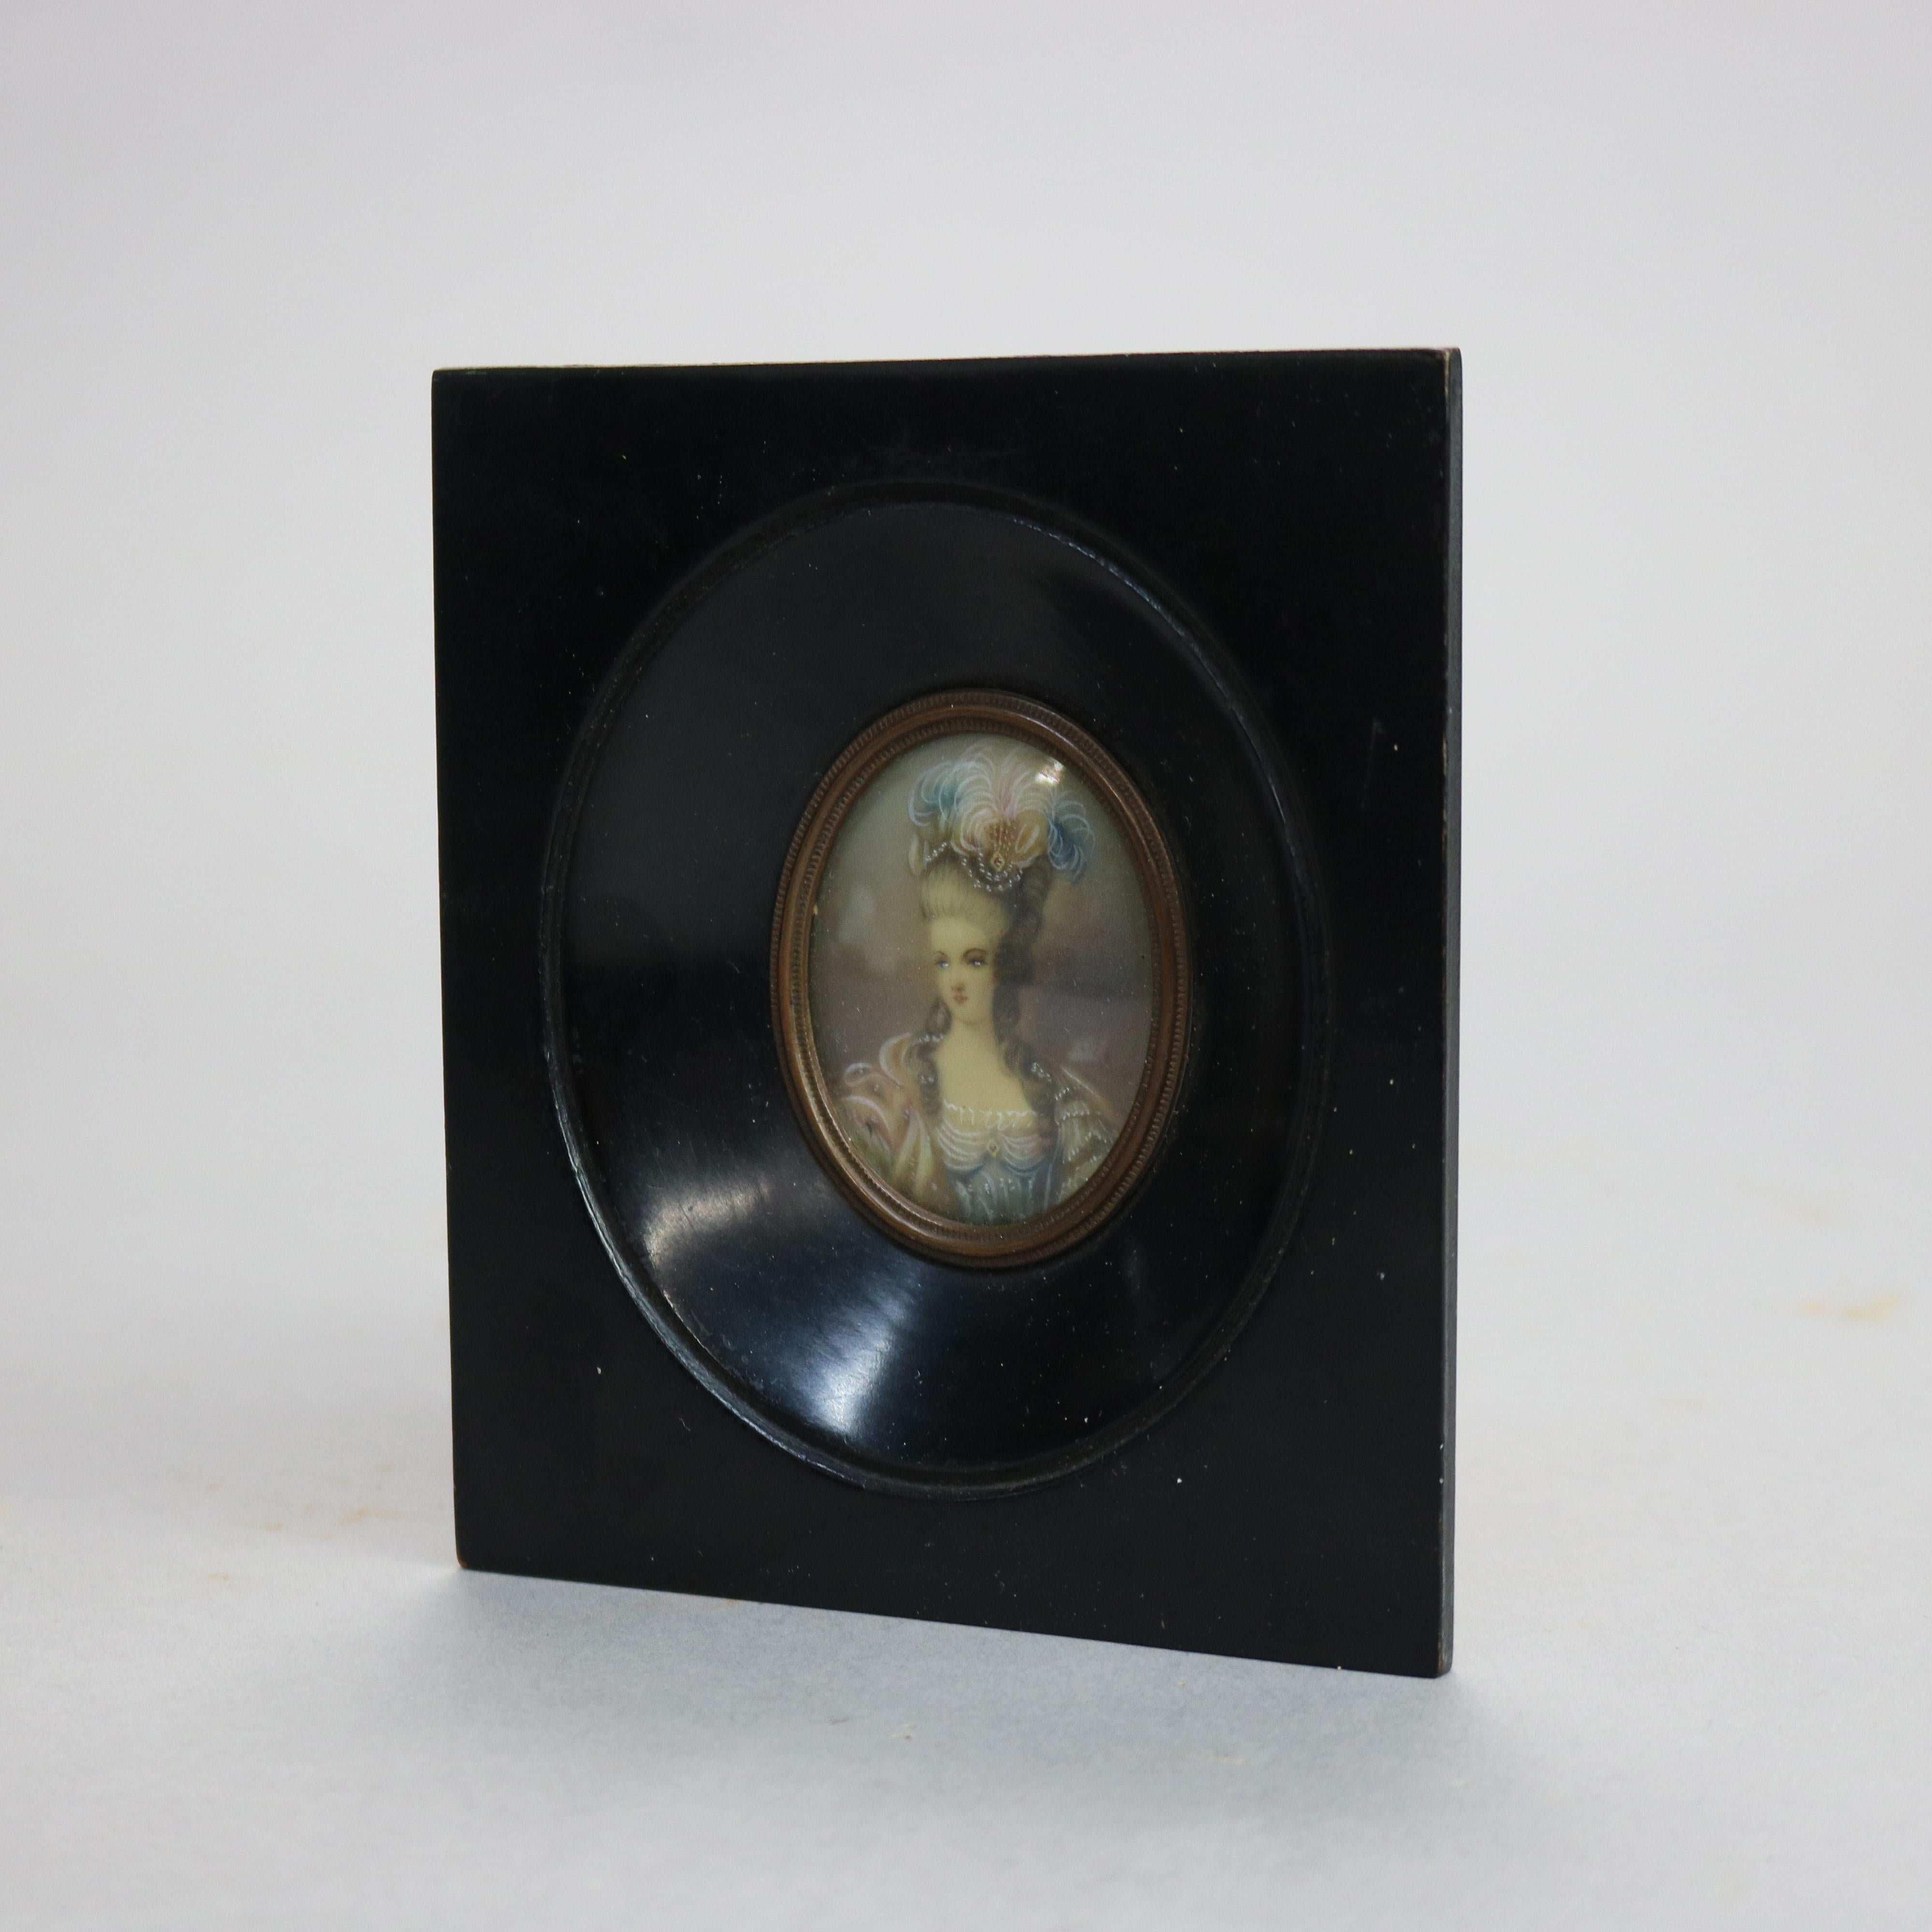 Hand-Painted Antique Miniature Portrait Painting on Celluloid of Marie Antoinette Late 19th C